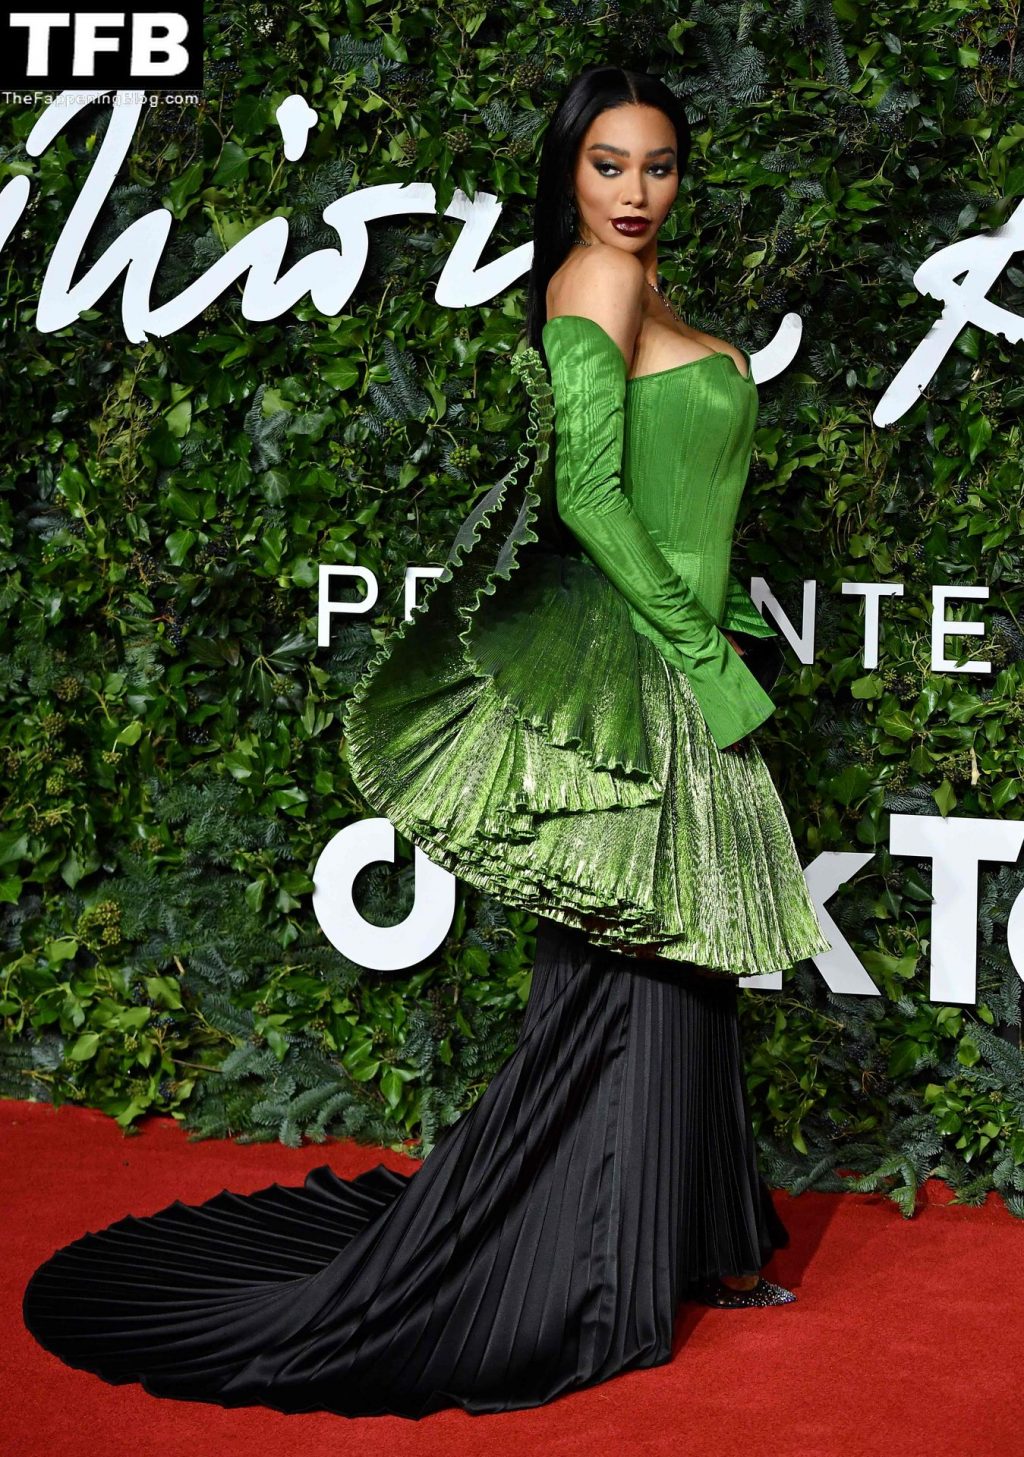 Munroe Bergdorf Looks Hot at The Fashion Awards 2021 in London (55 Photos)